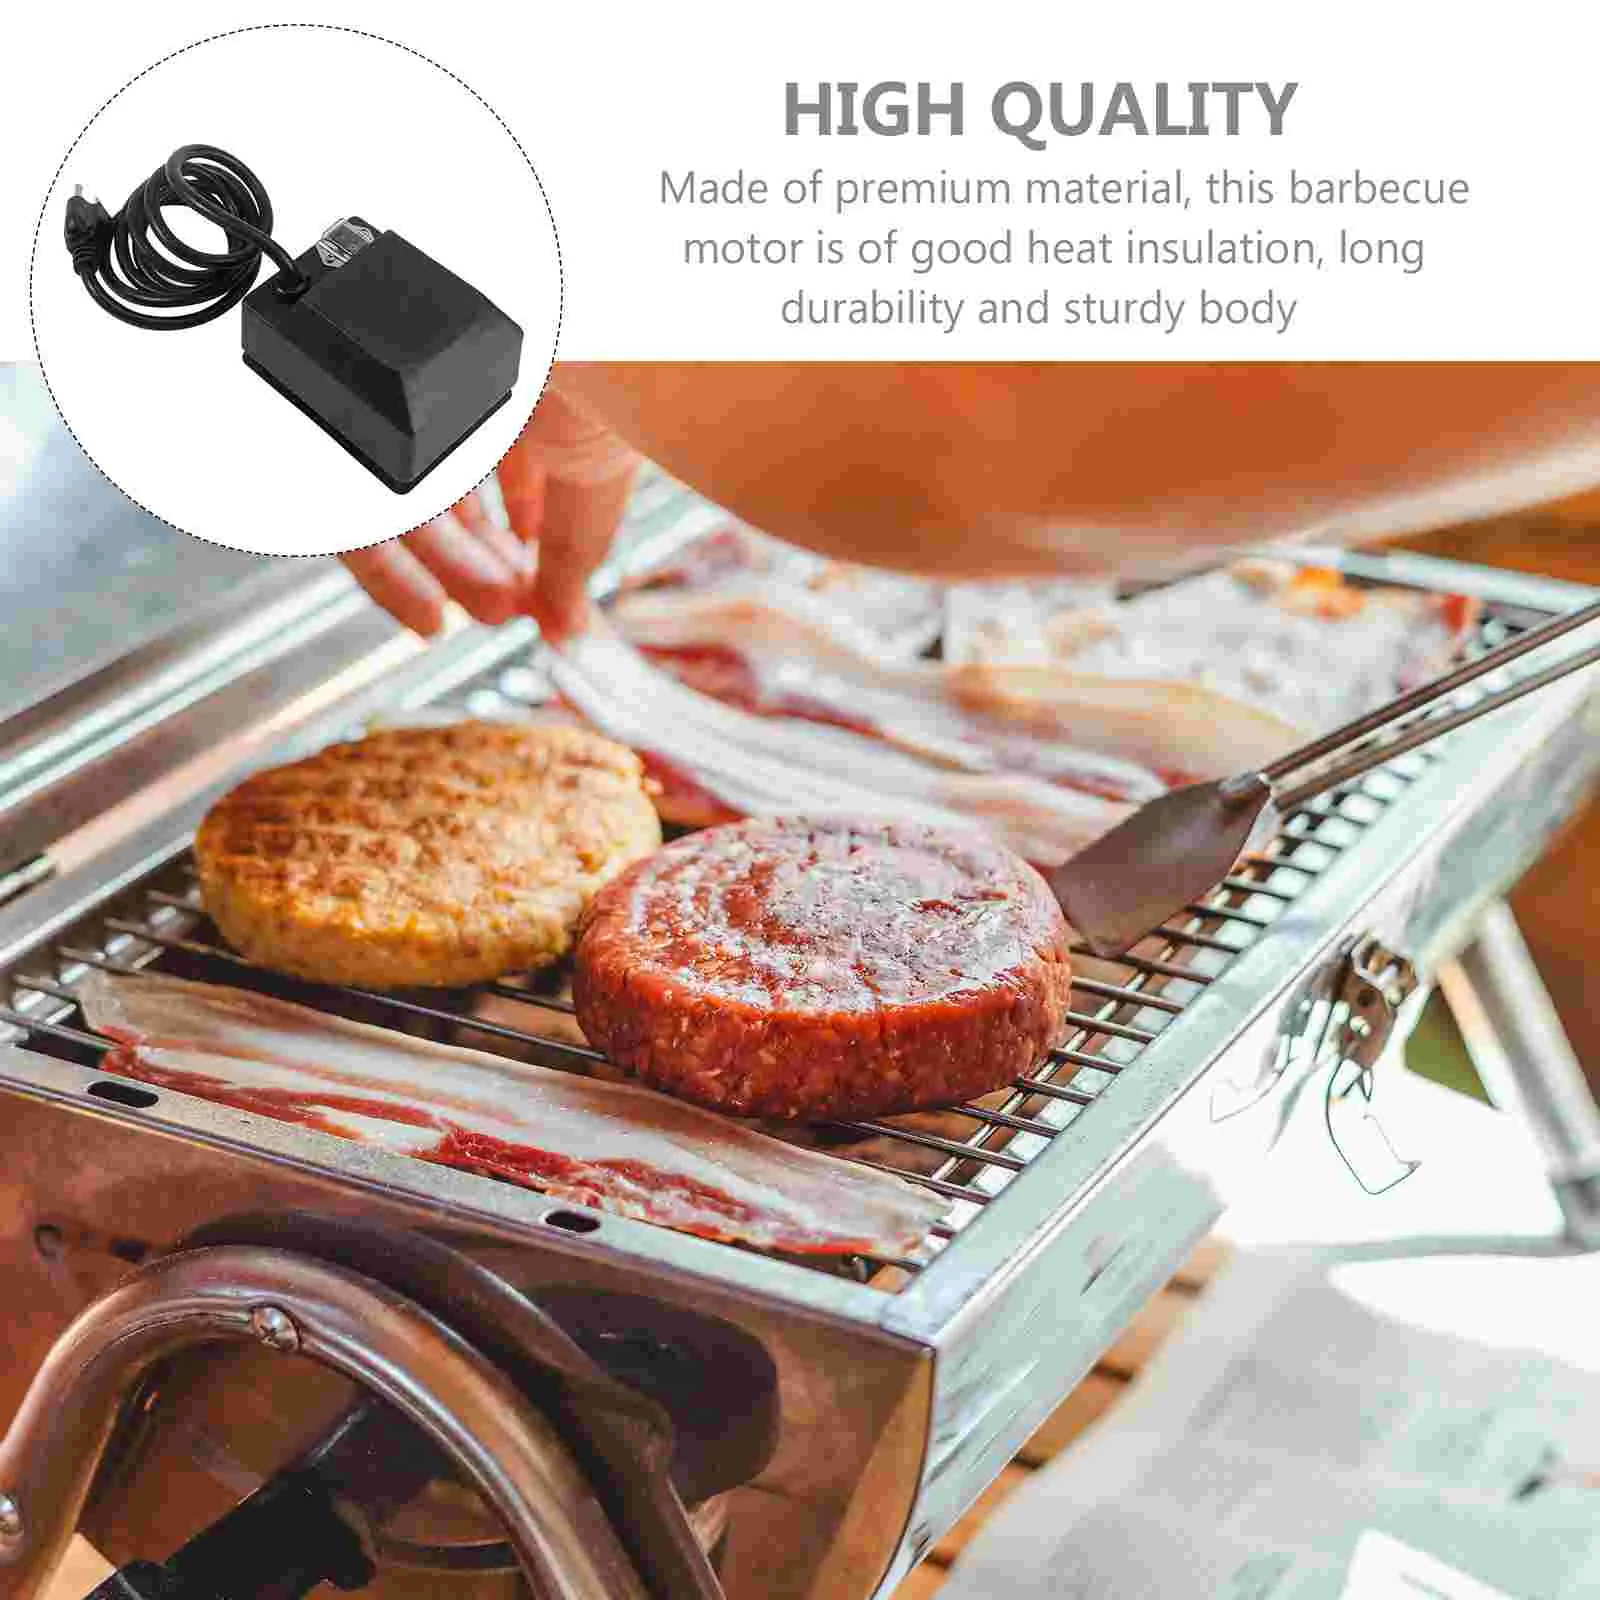 1 pc electric prime barbecue motor grill motor for hiking camping home barbecue motor free global shipping